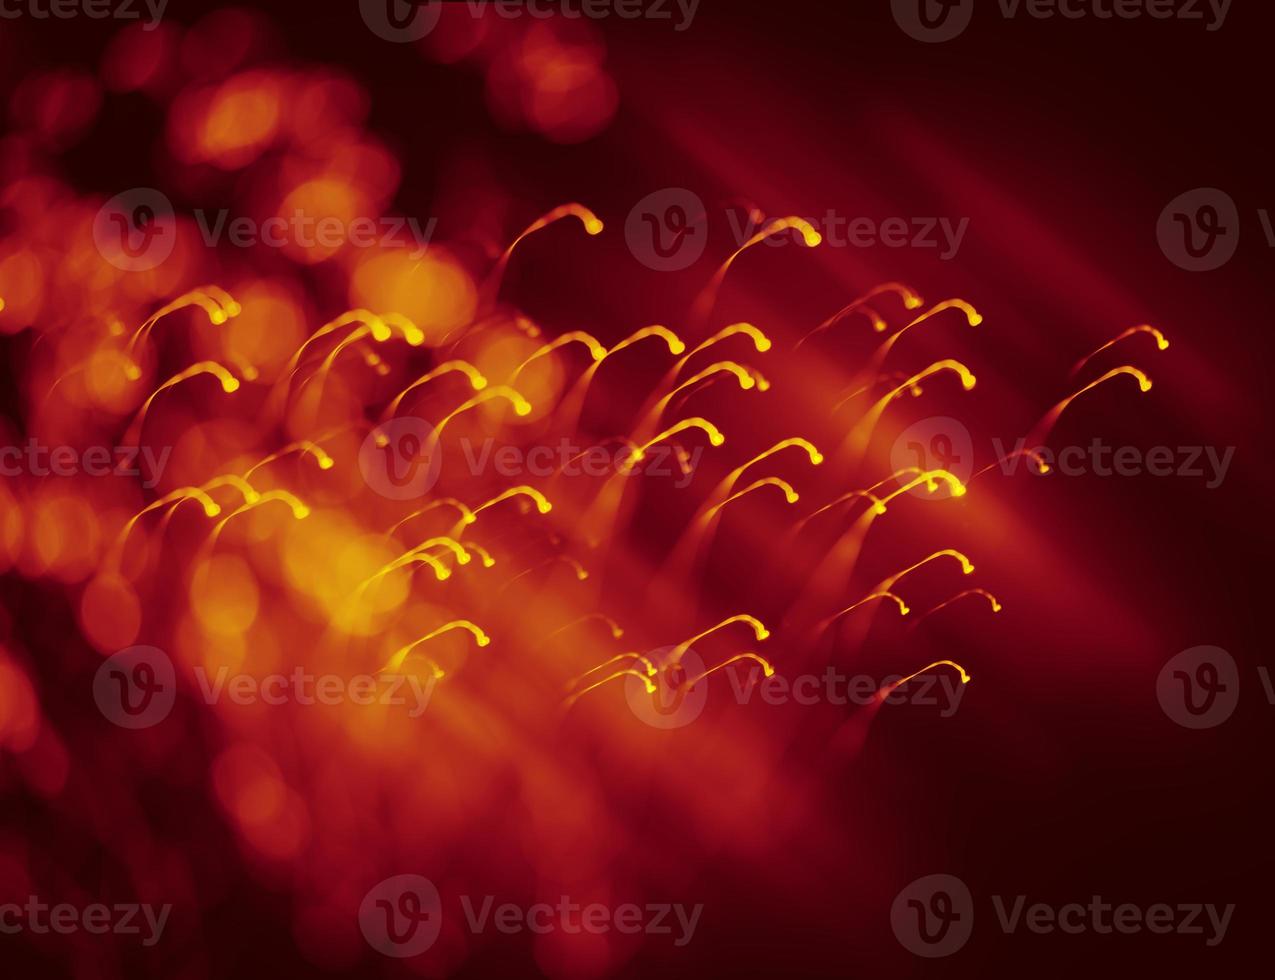 Abstract bokeh background photo